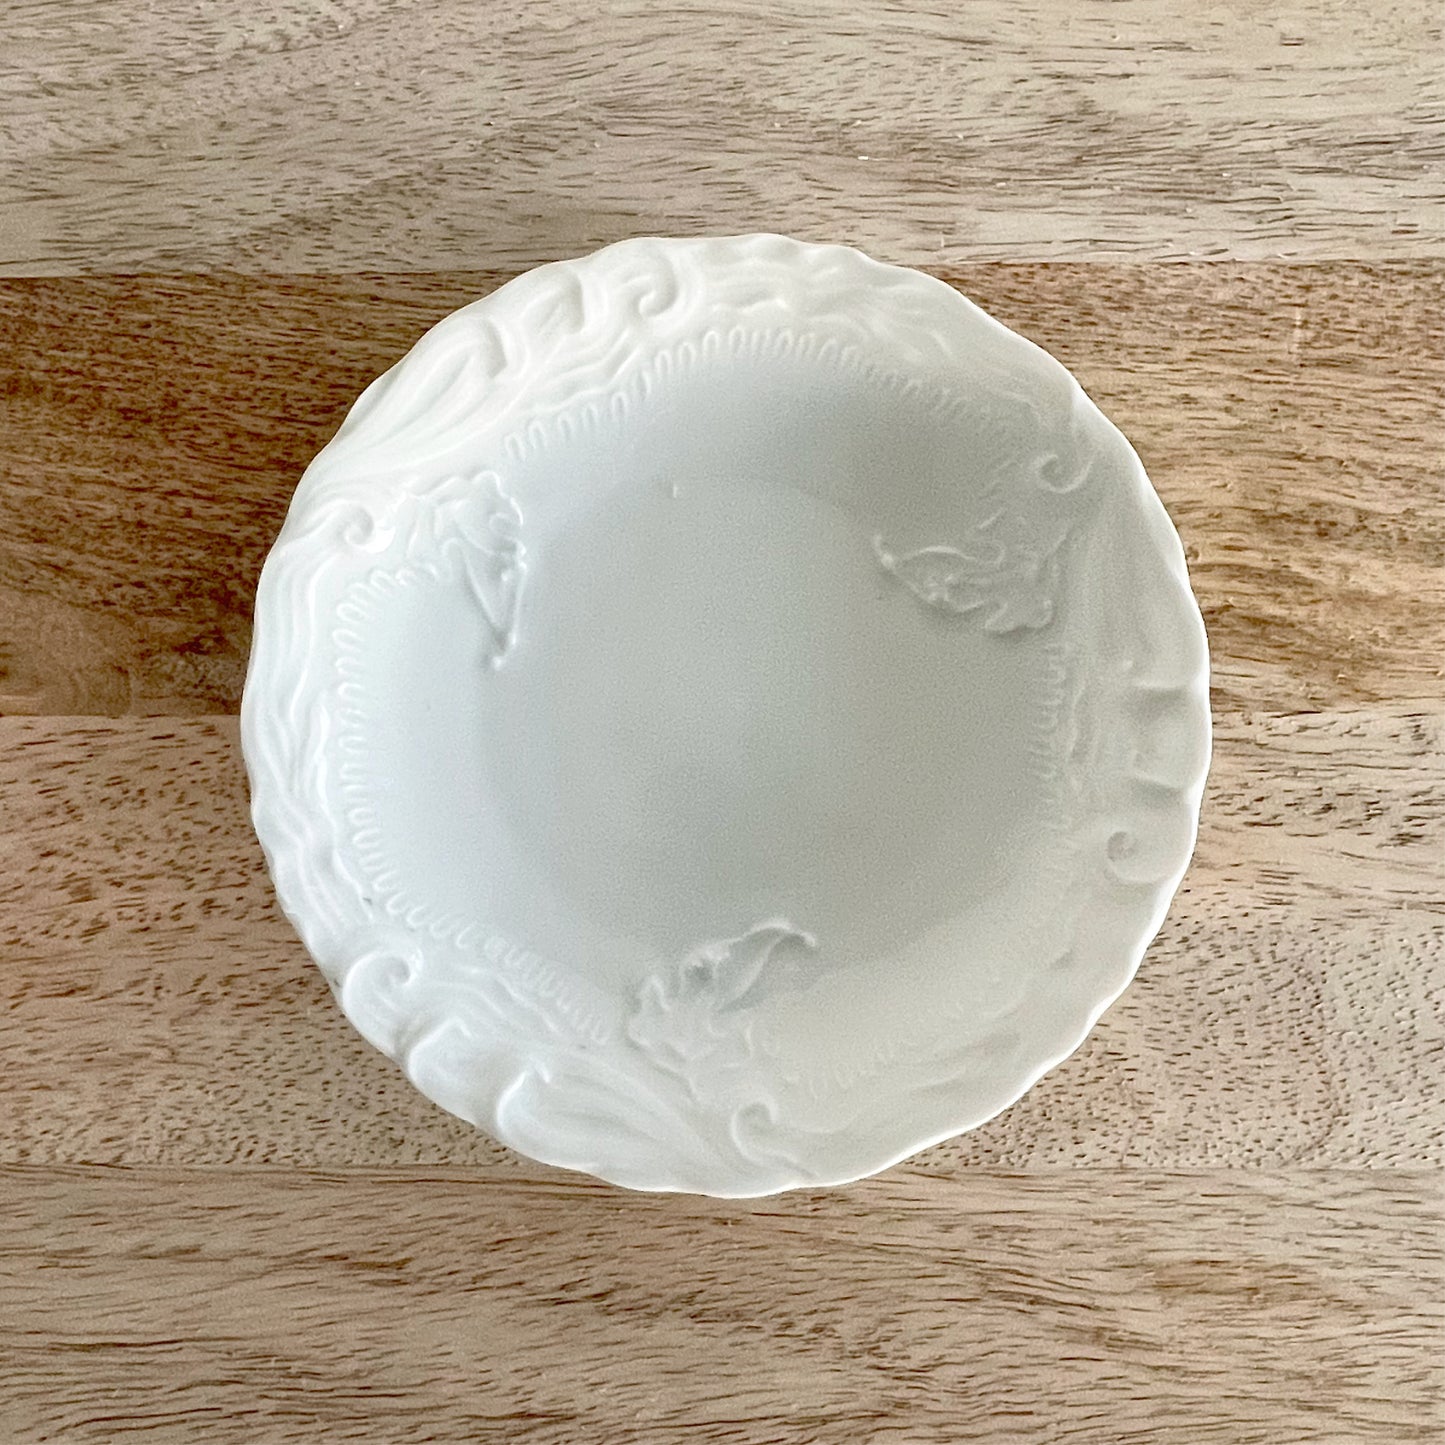 French antique white porcelain china - saucer